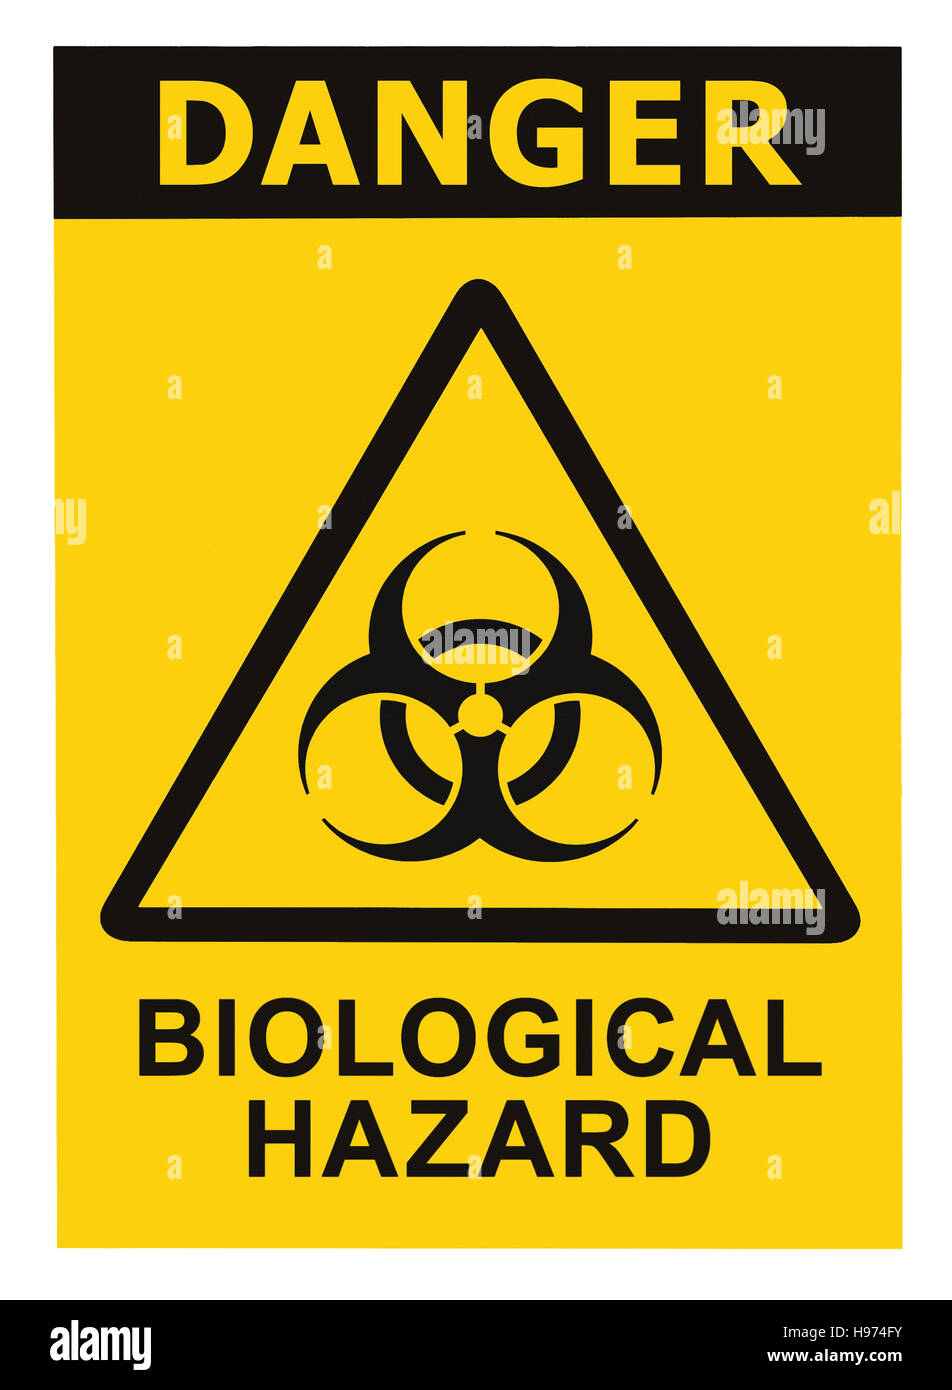 Biohazard symbol sign of biological threat alert, black yellow triangle signage text isolated Stock Photo